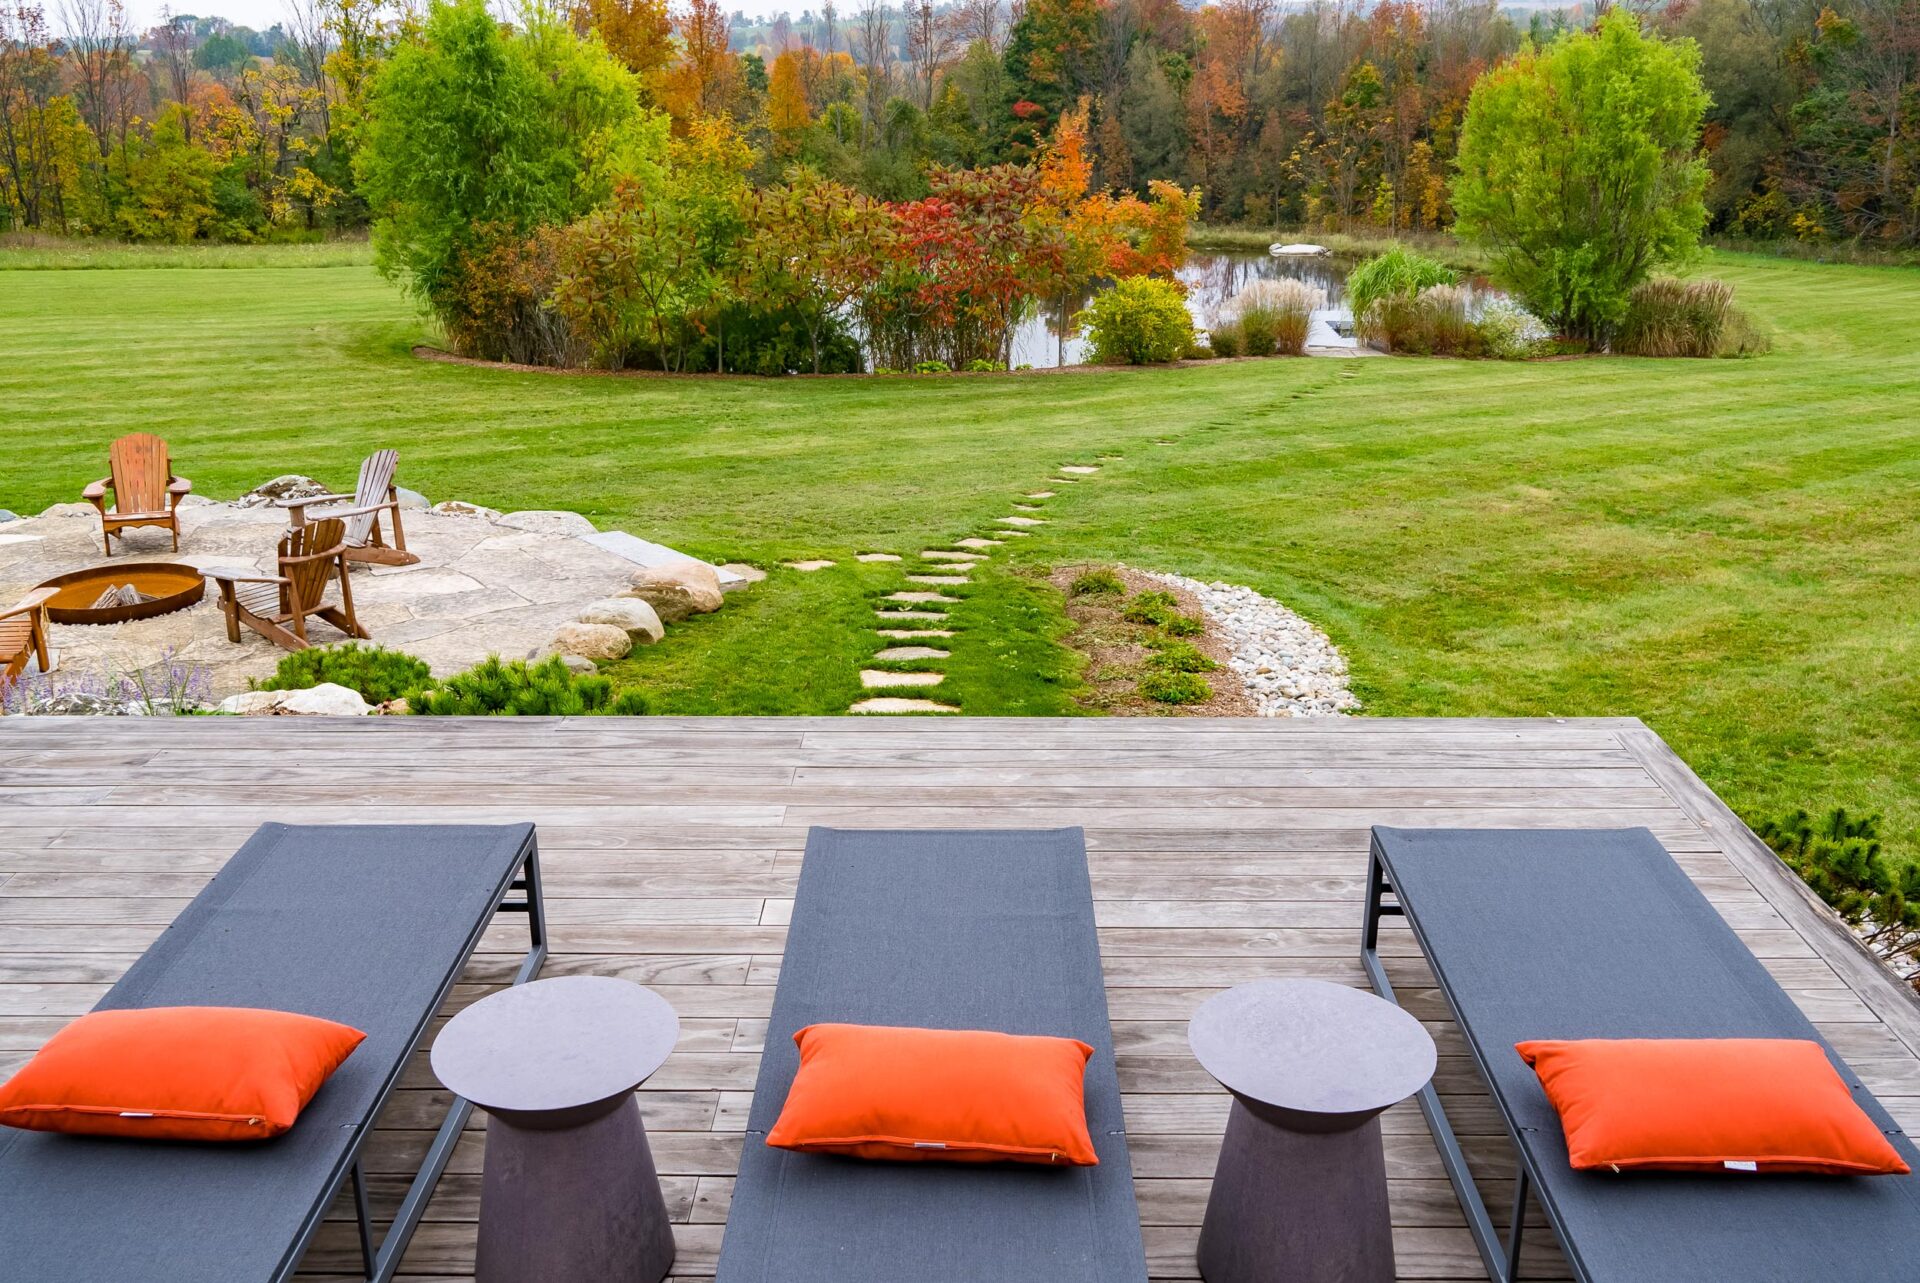 A serene outdoor setting with lounge chairs, orange cushions, a fire pit with Adirondack chairs, and a lush landscape with a pond in autumn.